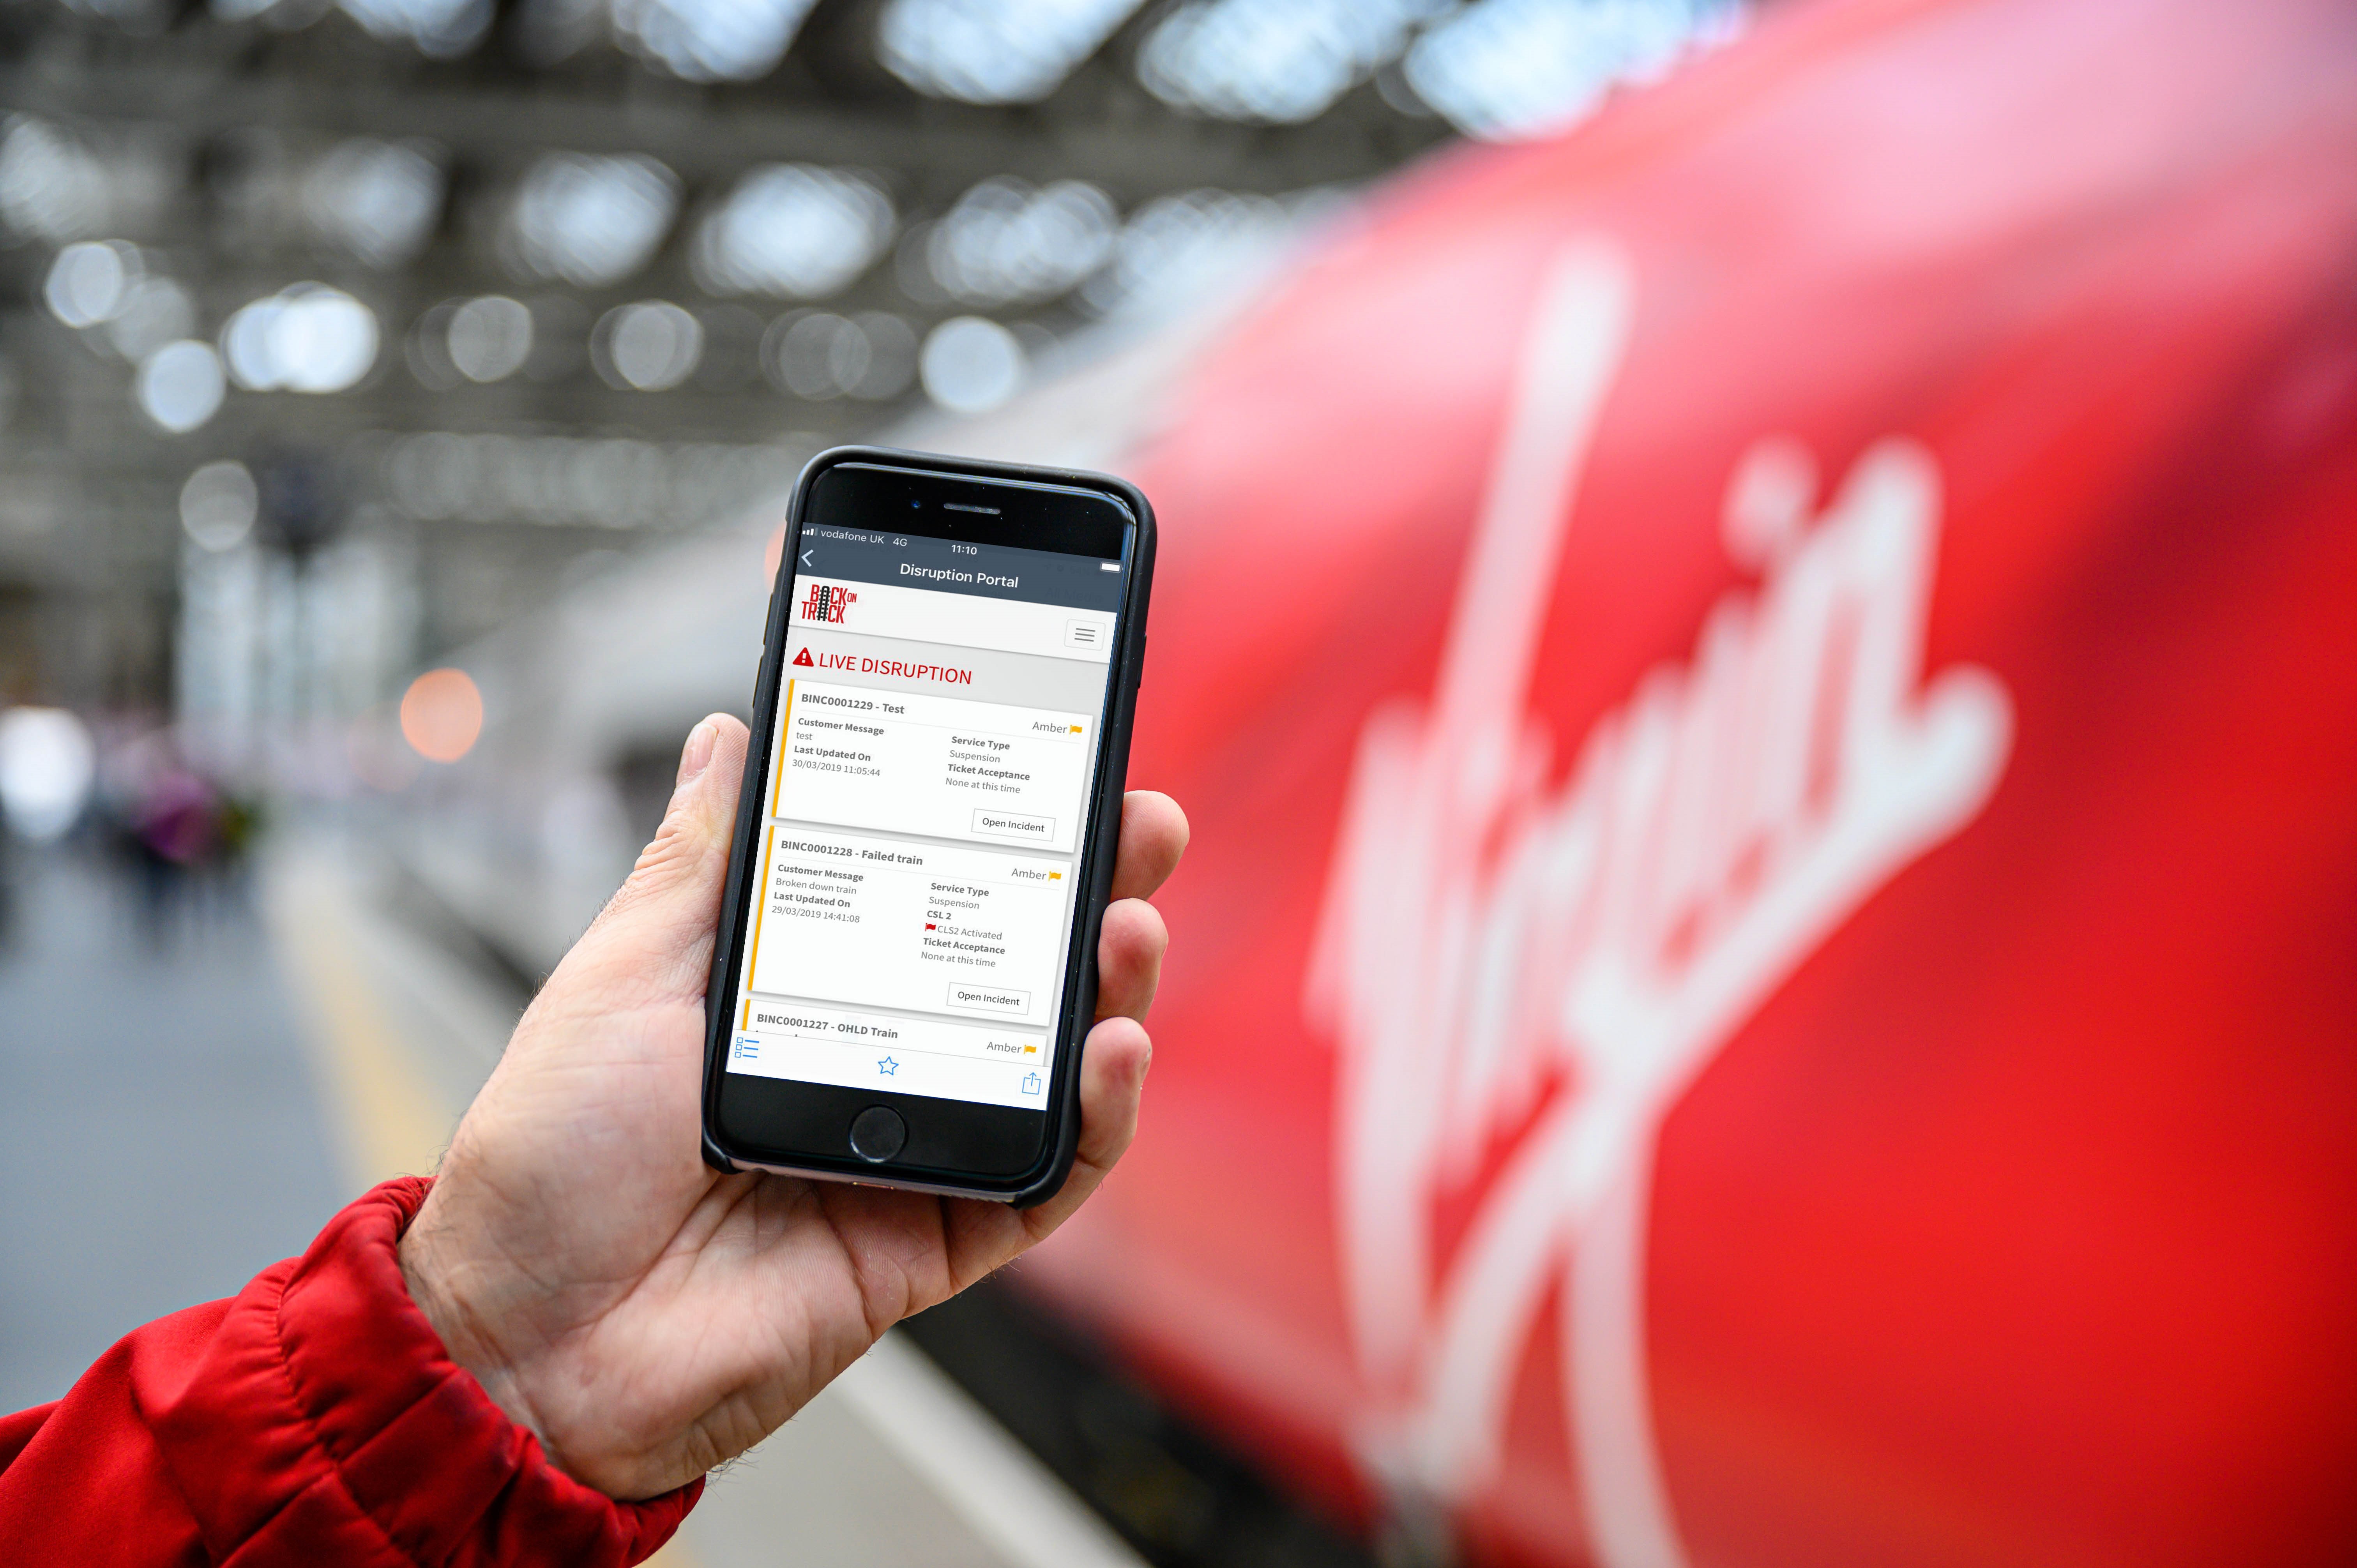 The Back on Track app is being used by Virgin Trains staff (Virgin Trains/PA)